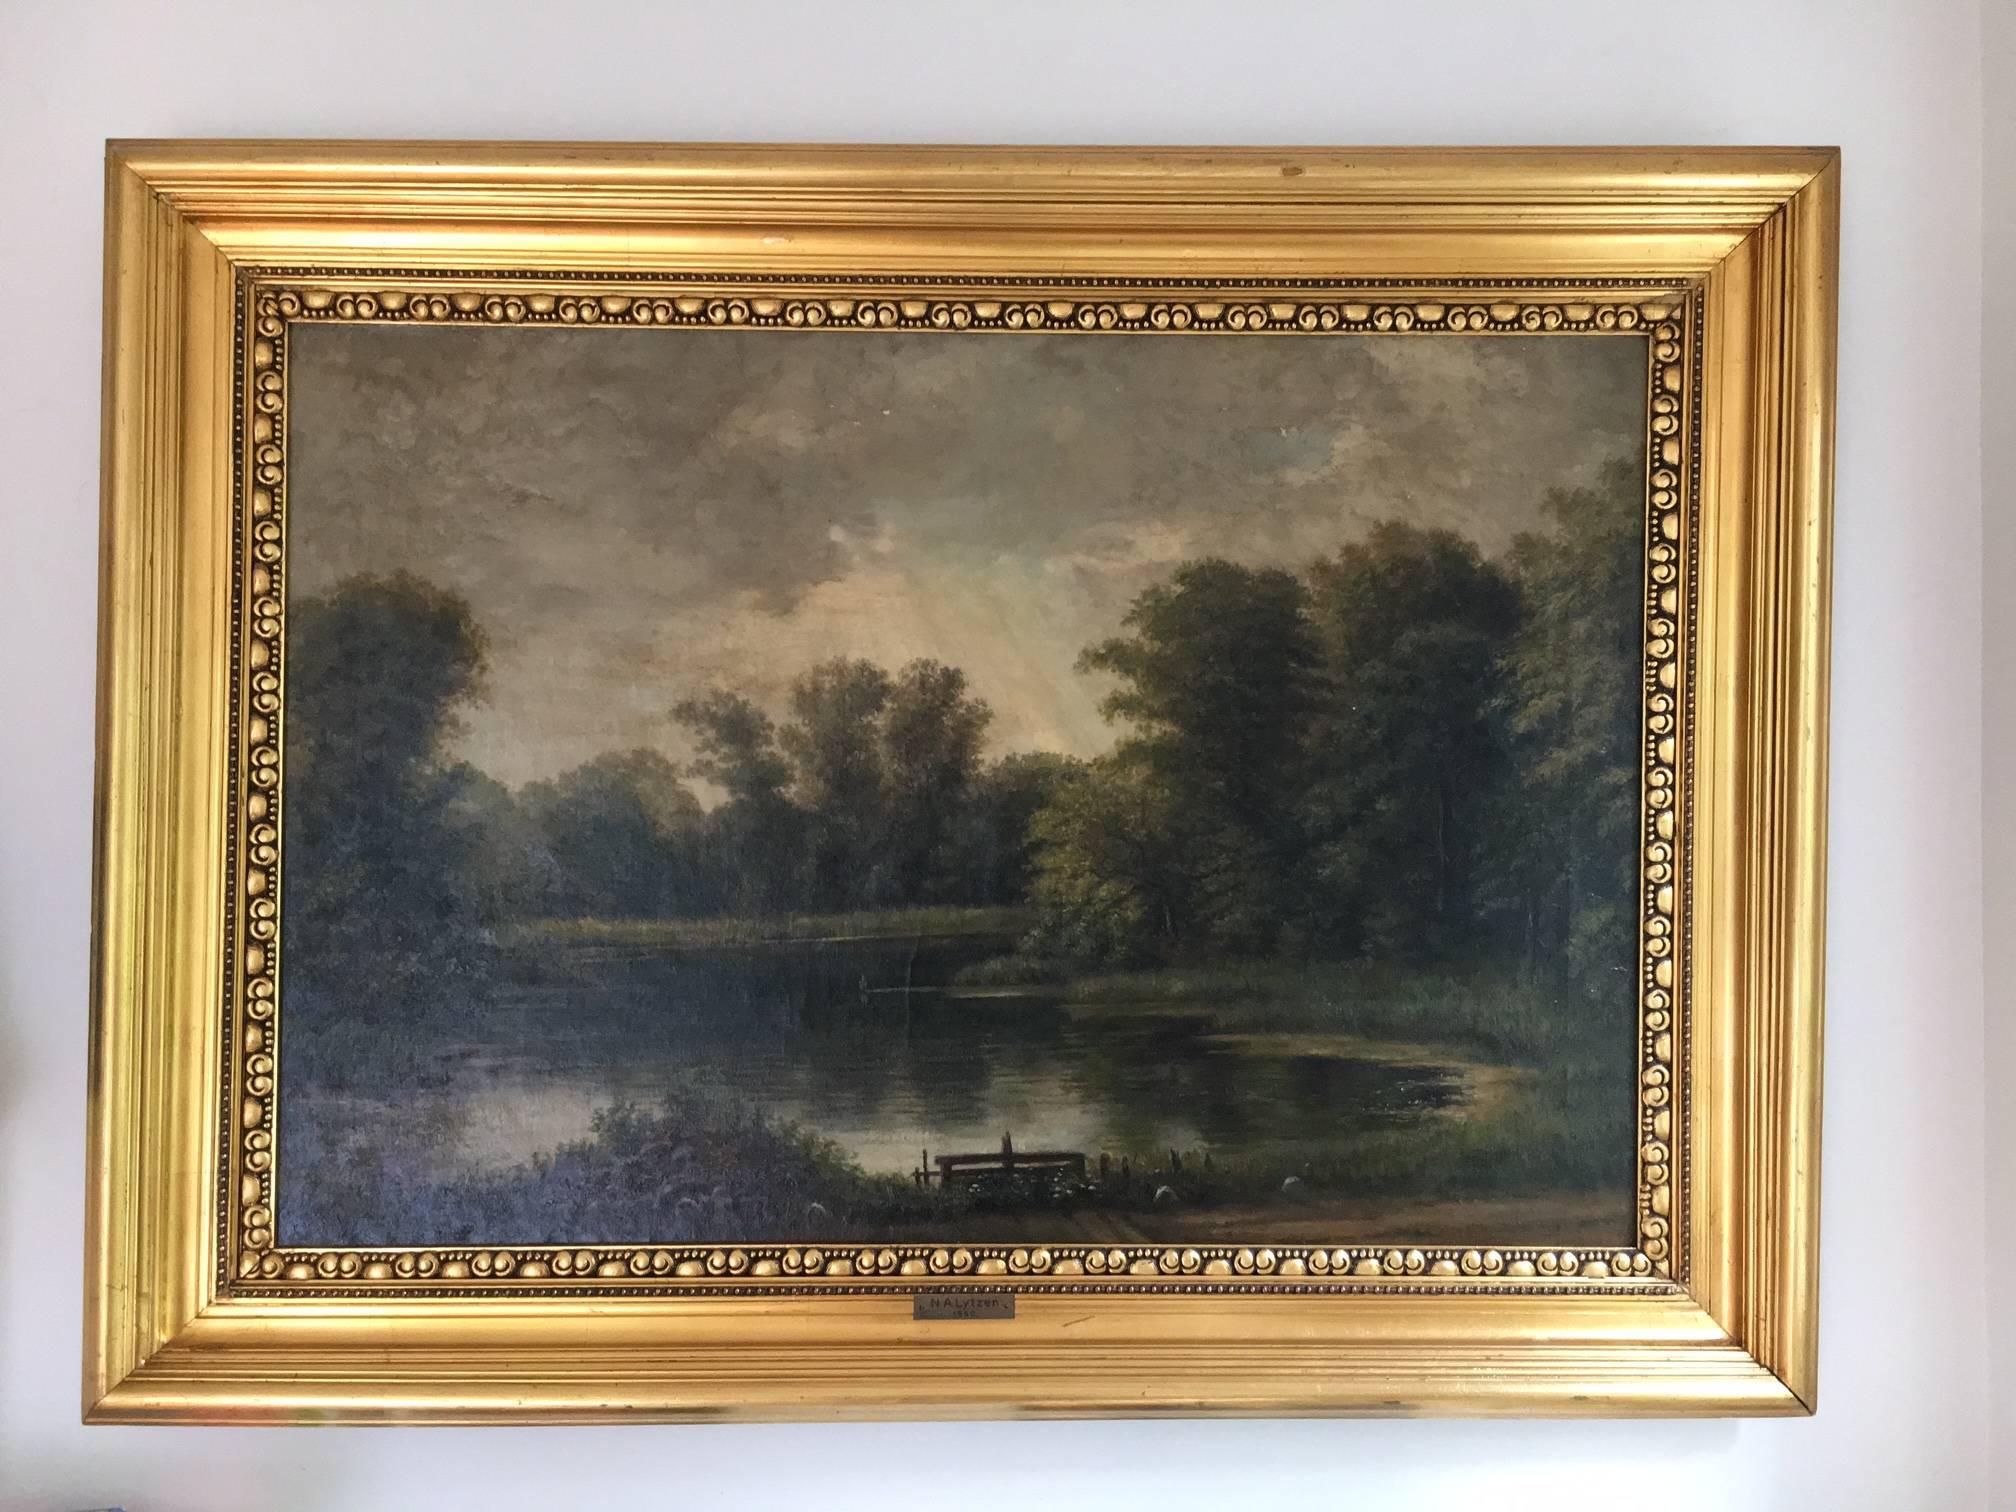 Giltwood Danish Forest Landscape with Lake by N.A. Lytzen